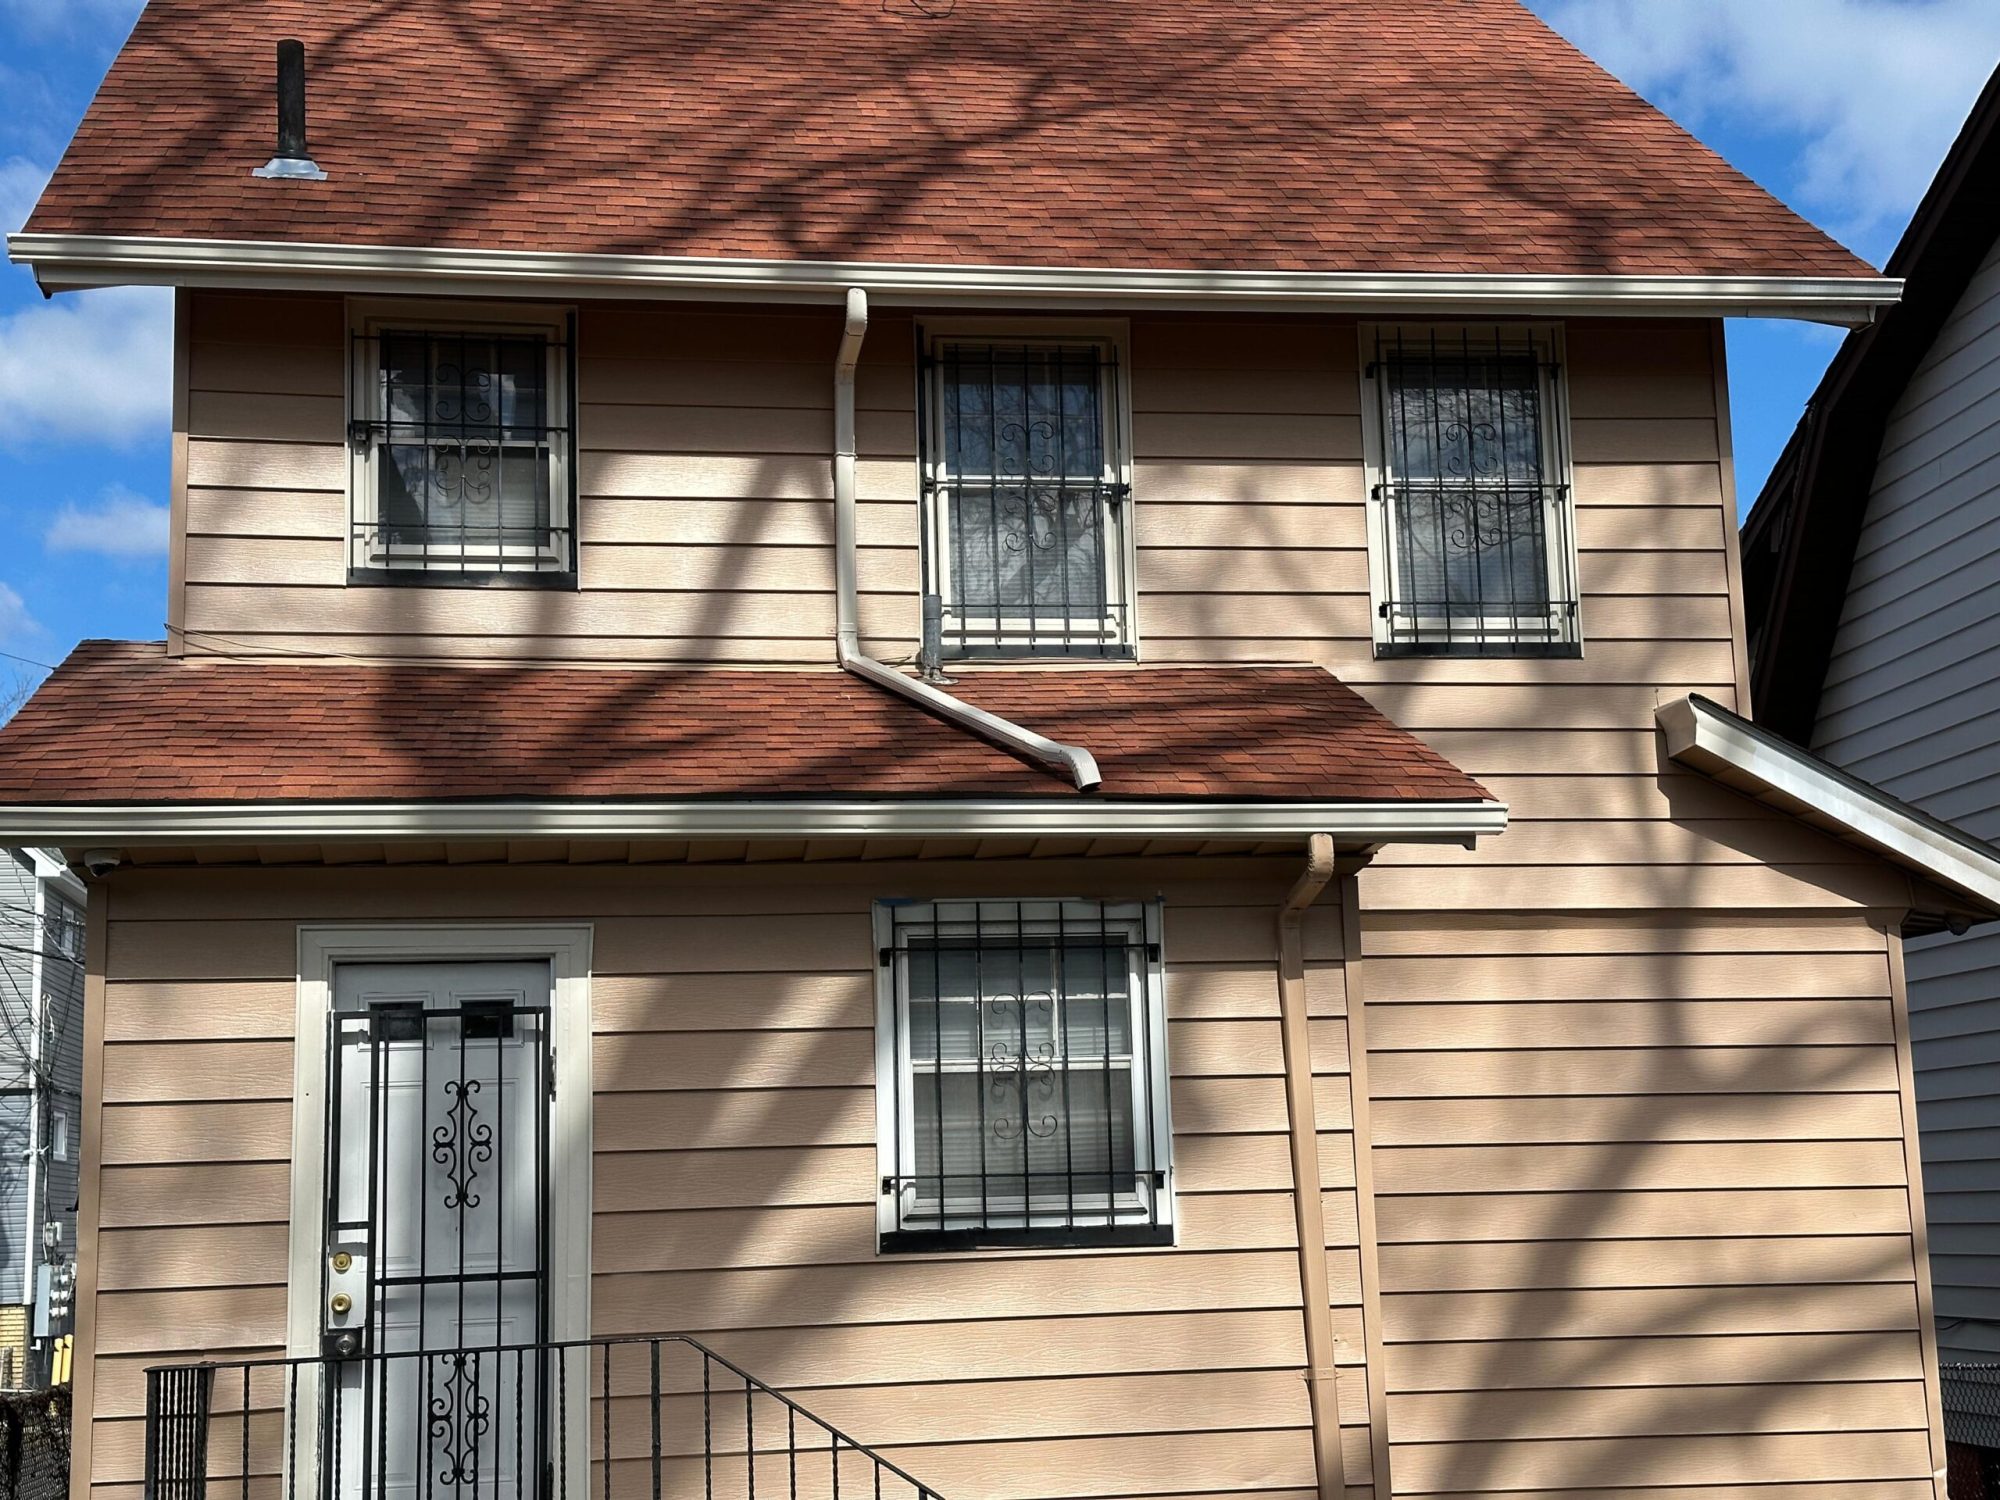 A house with a gutter on the roof cleaning service done by Clarke's professional.